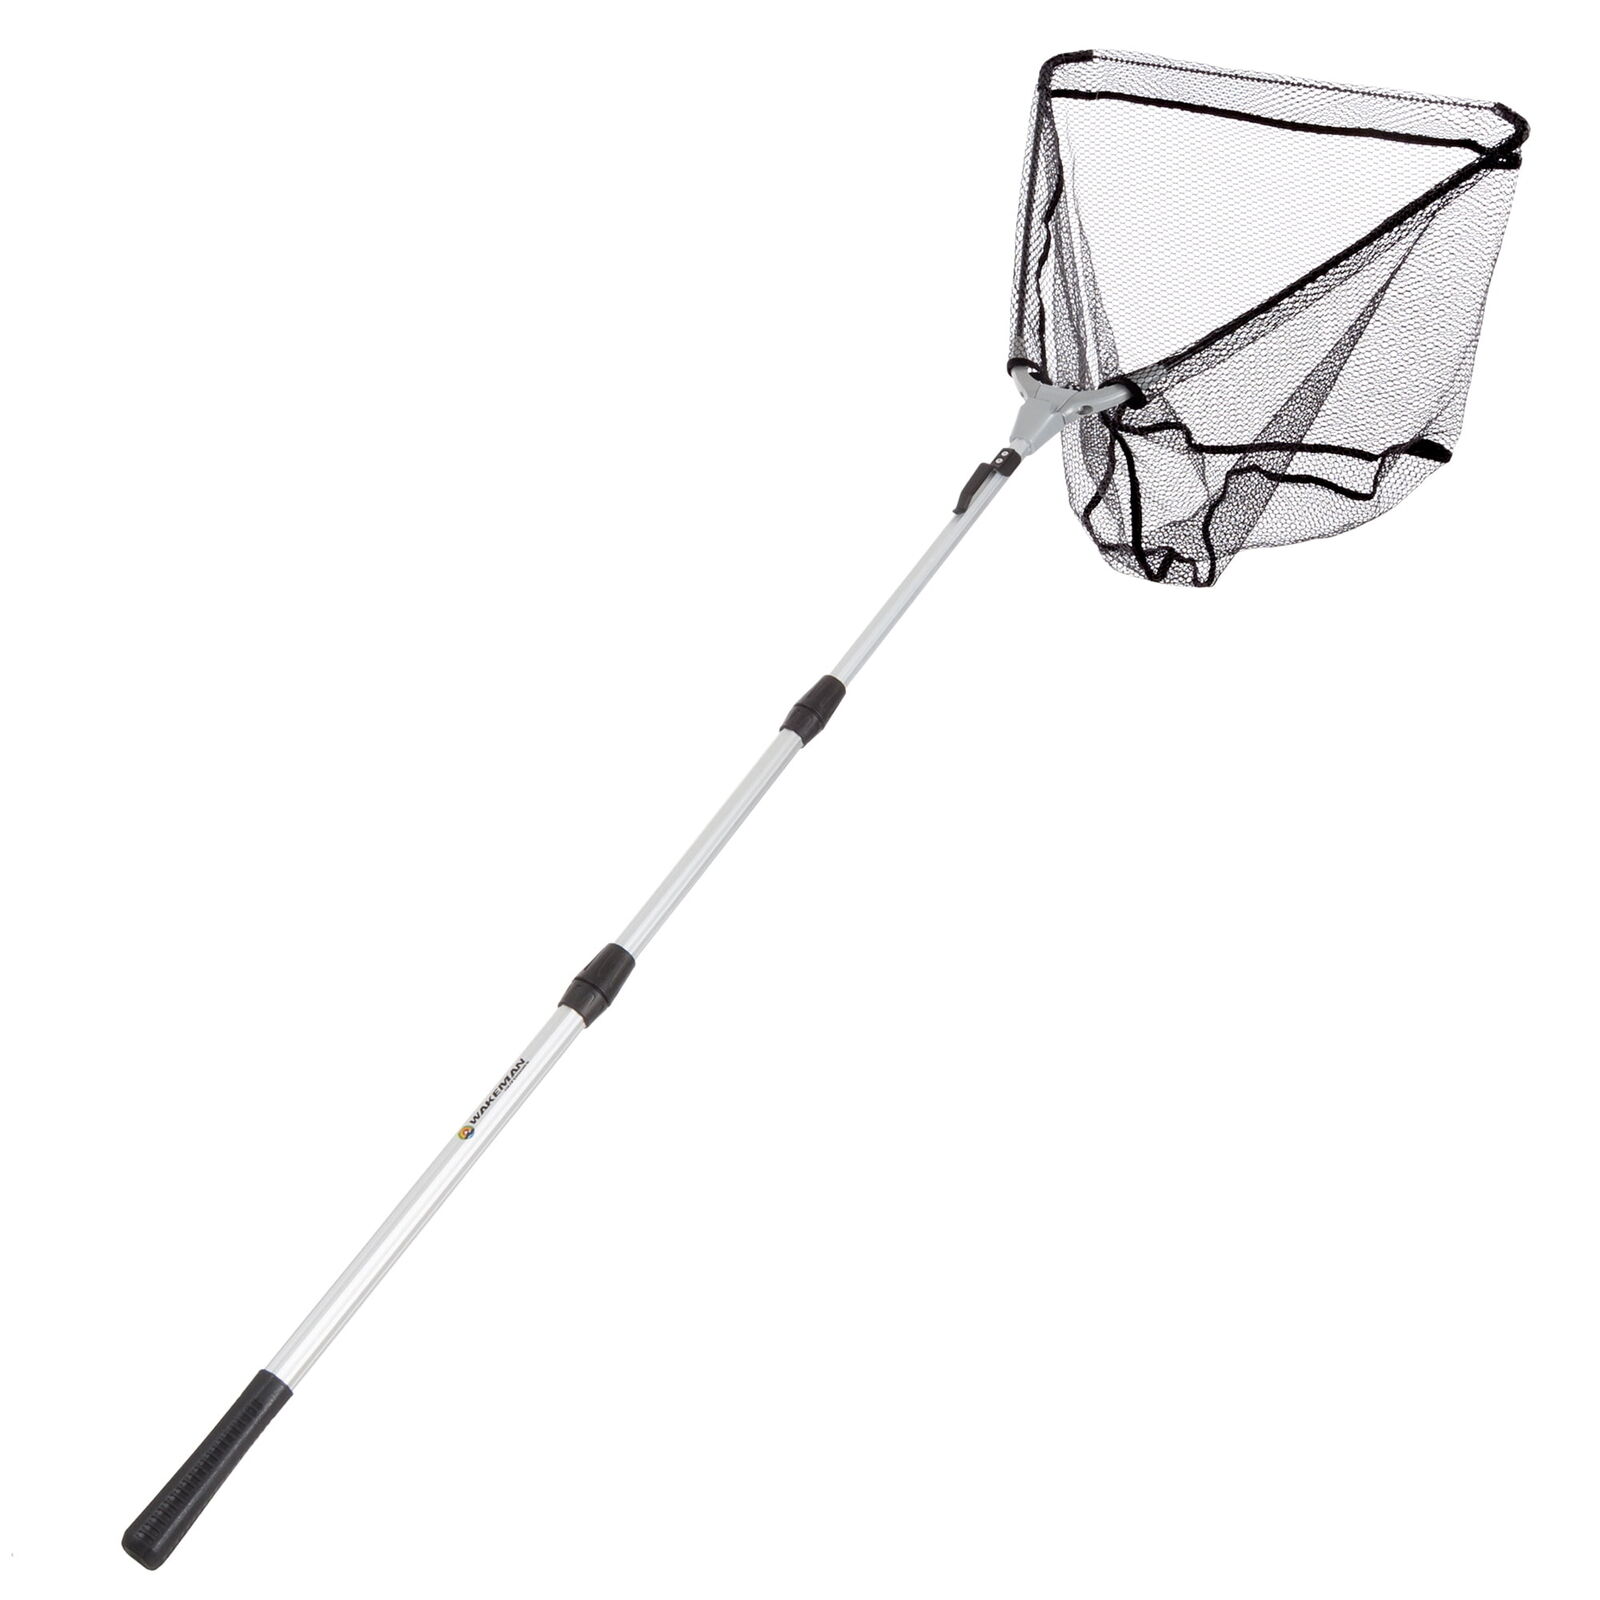 Fishing Net with Telescoping Handle- Collapsible and Adjustable Landing Net with